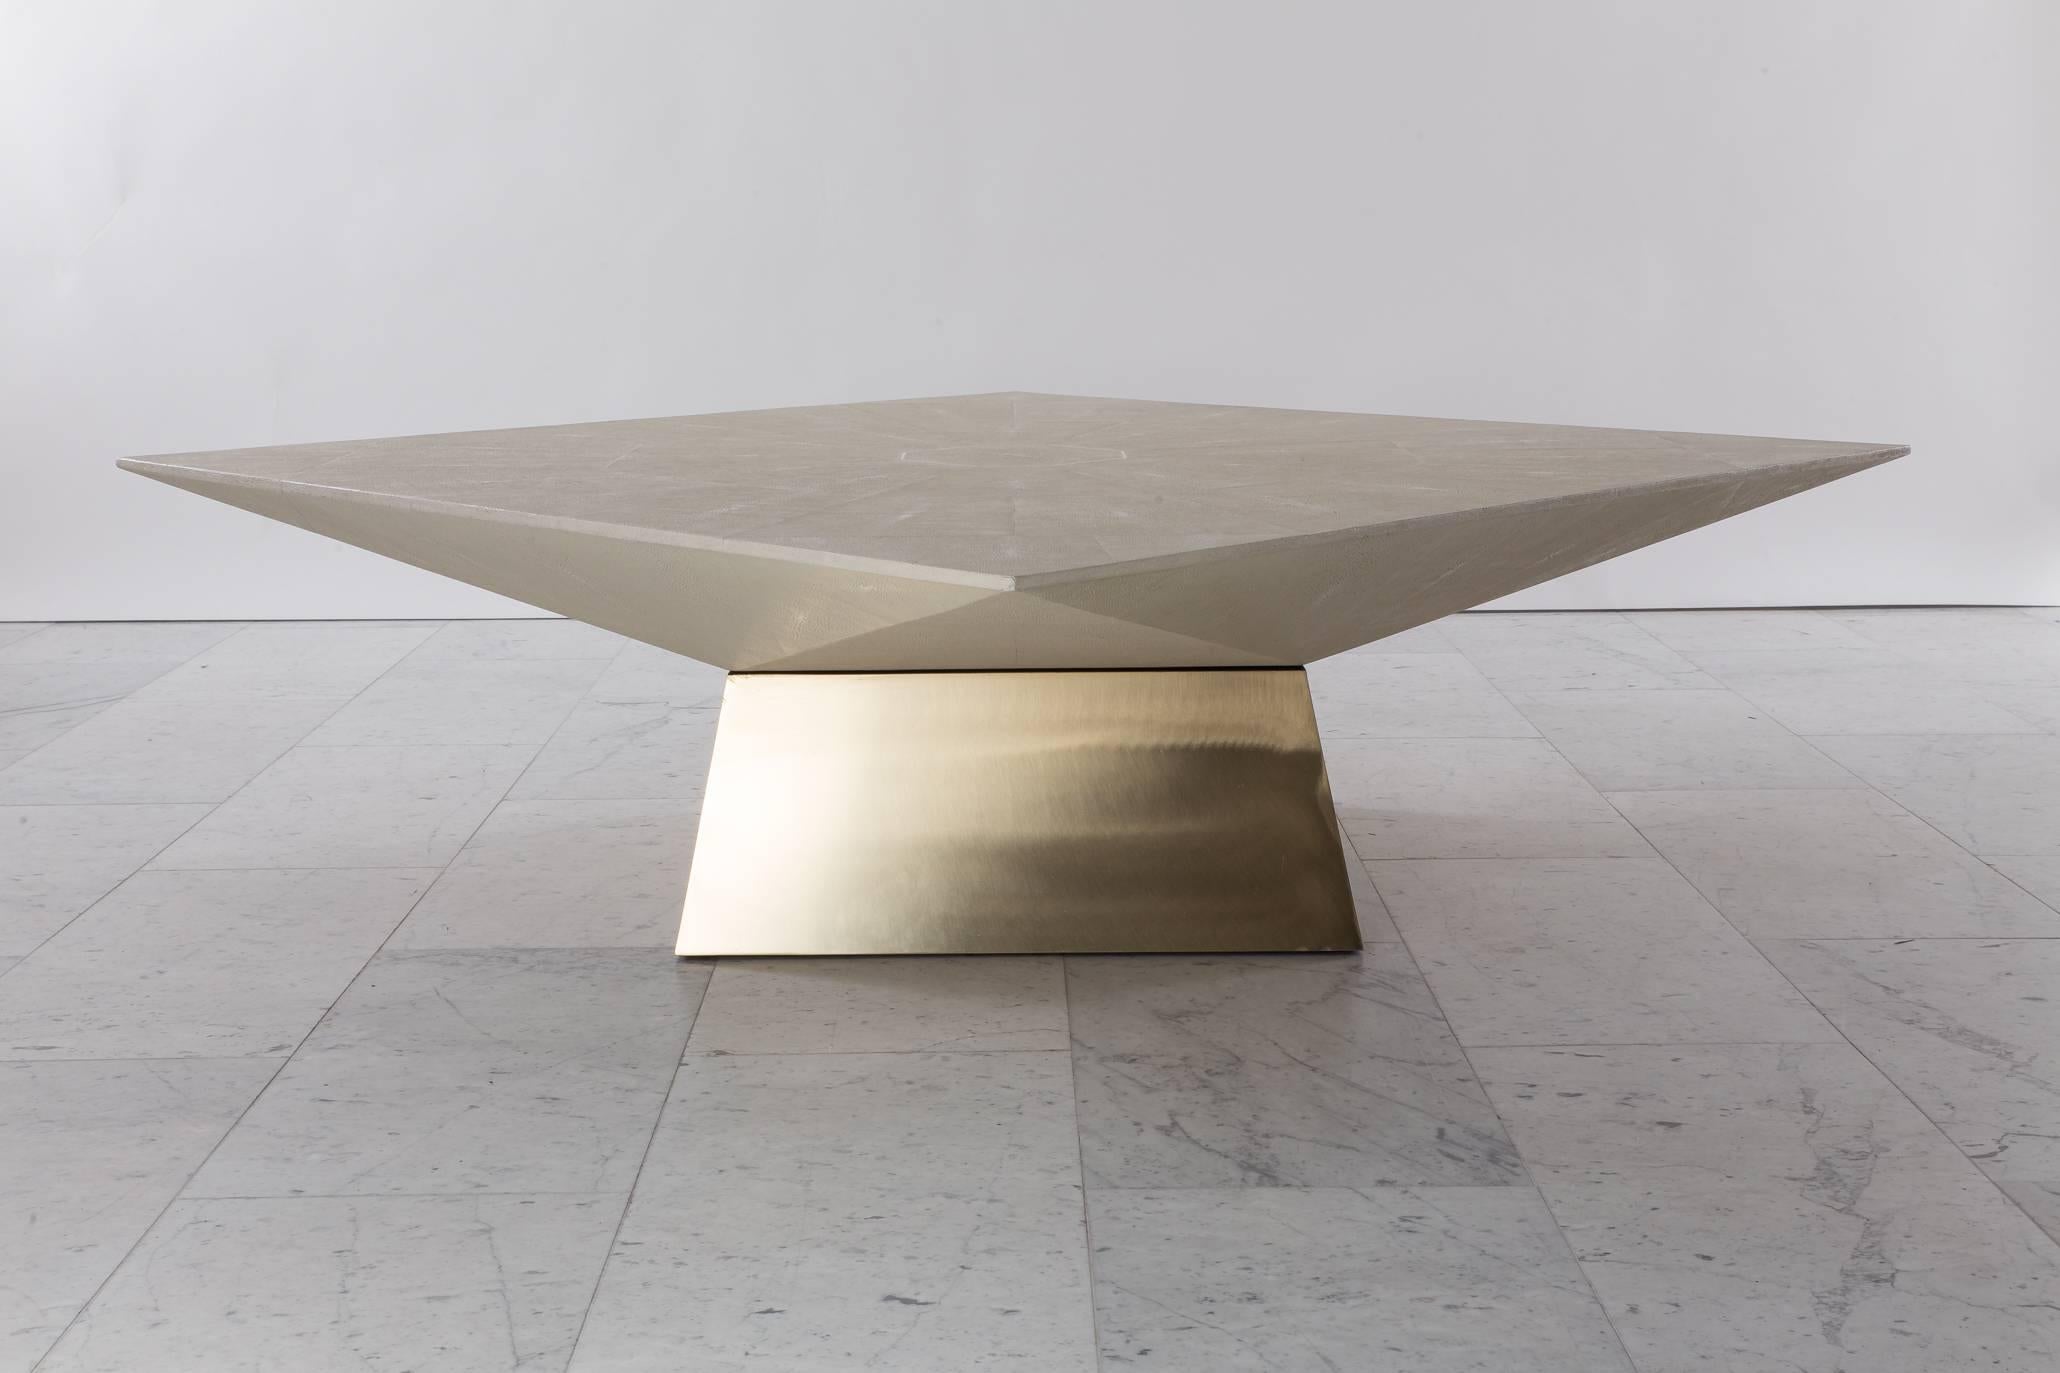 An exquisite low table with a shagreen top and brass base that looks dynamically unique at each angle from which it is viewed. The shagreen features an exquisite octagonal design on its top. 

Today, integrating materials such as shagreen, bone,